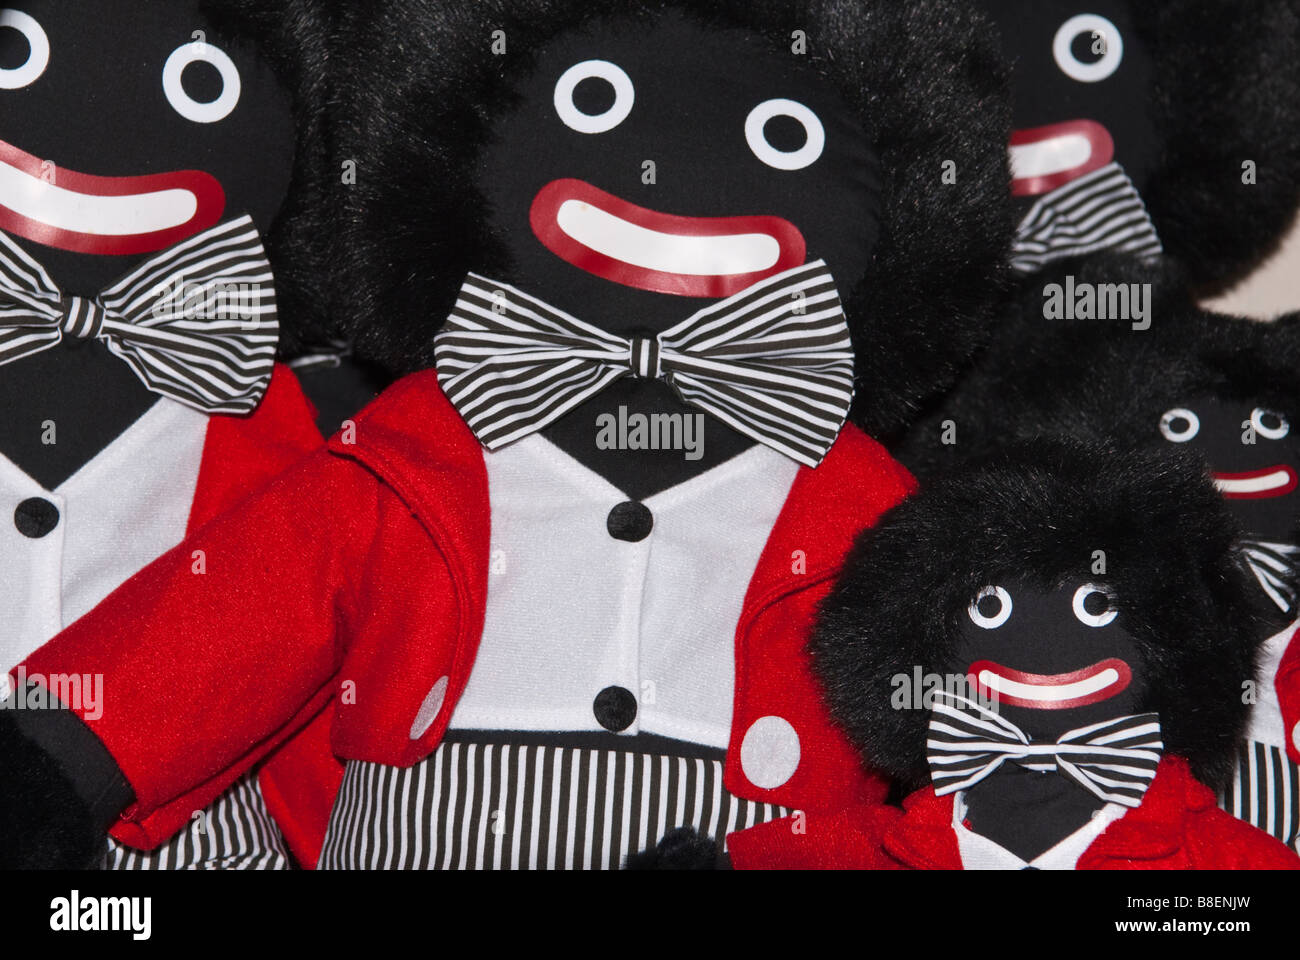 Golliwogs for sale in a uk shop store Stock Photo